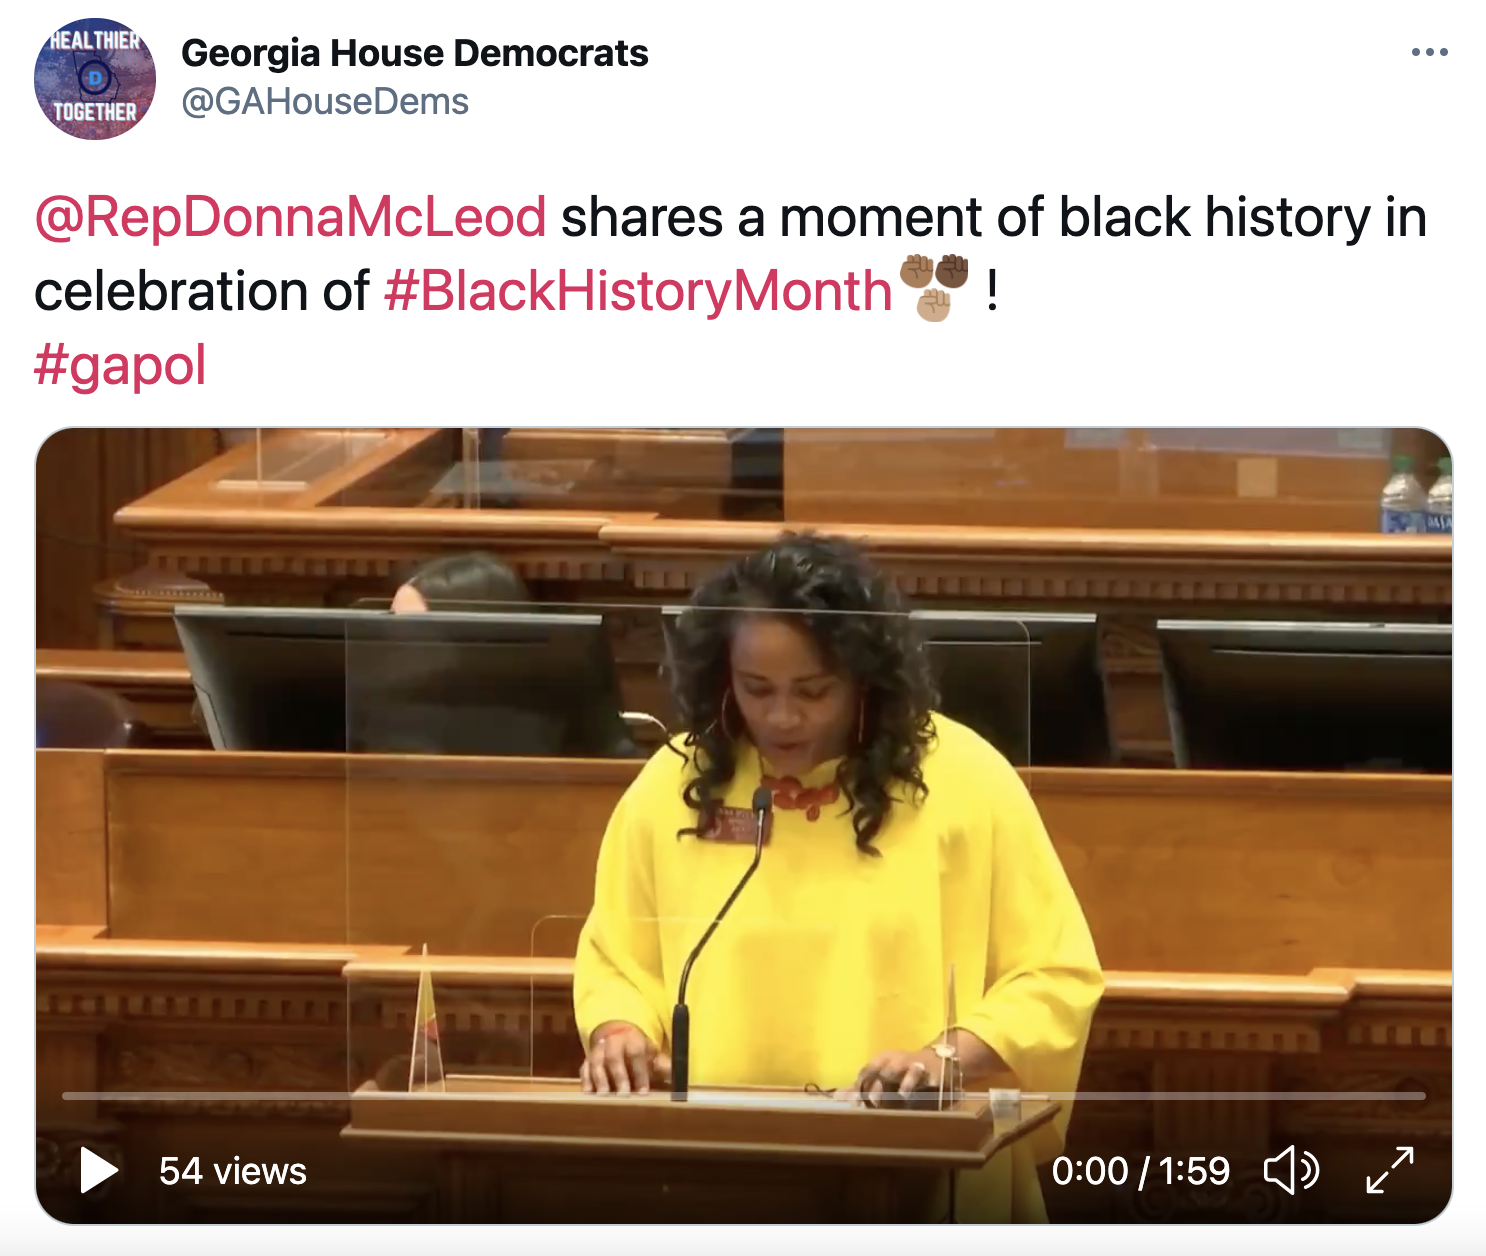 Georgia House Democrats: @RepDonnaMcLeod shares a moment of black history in celebration of #BlackHistoryMonth! #gapol